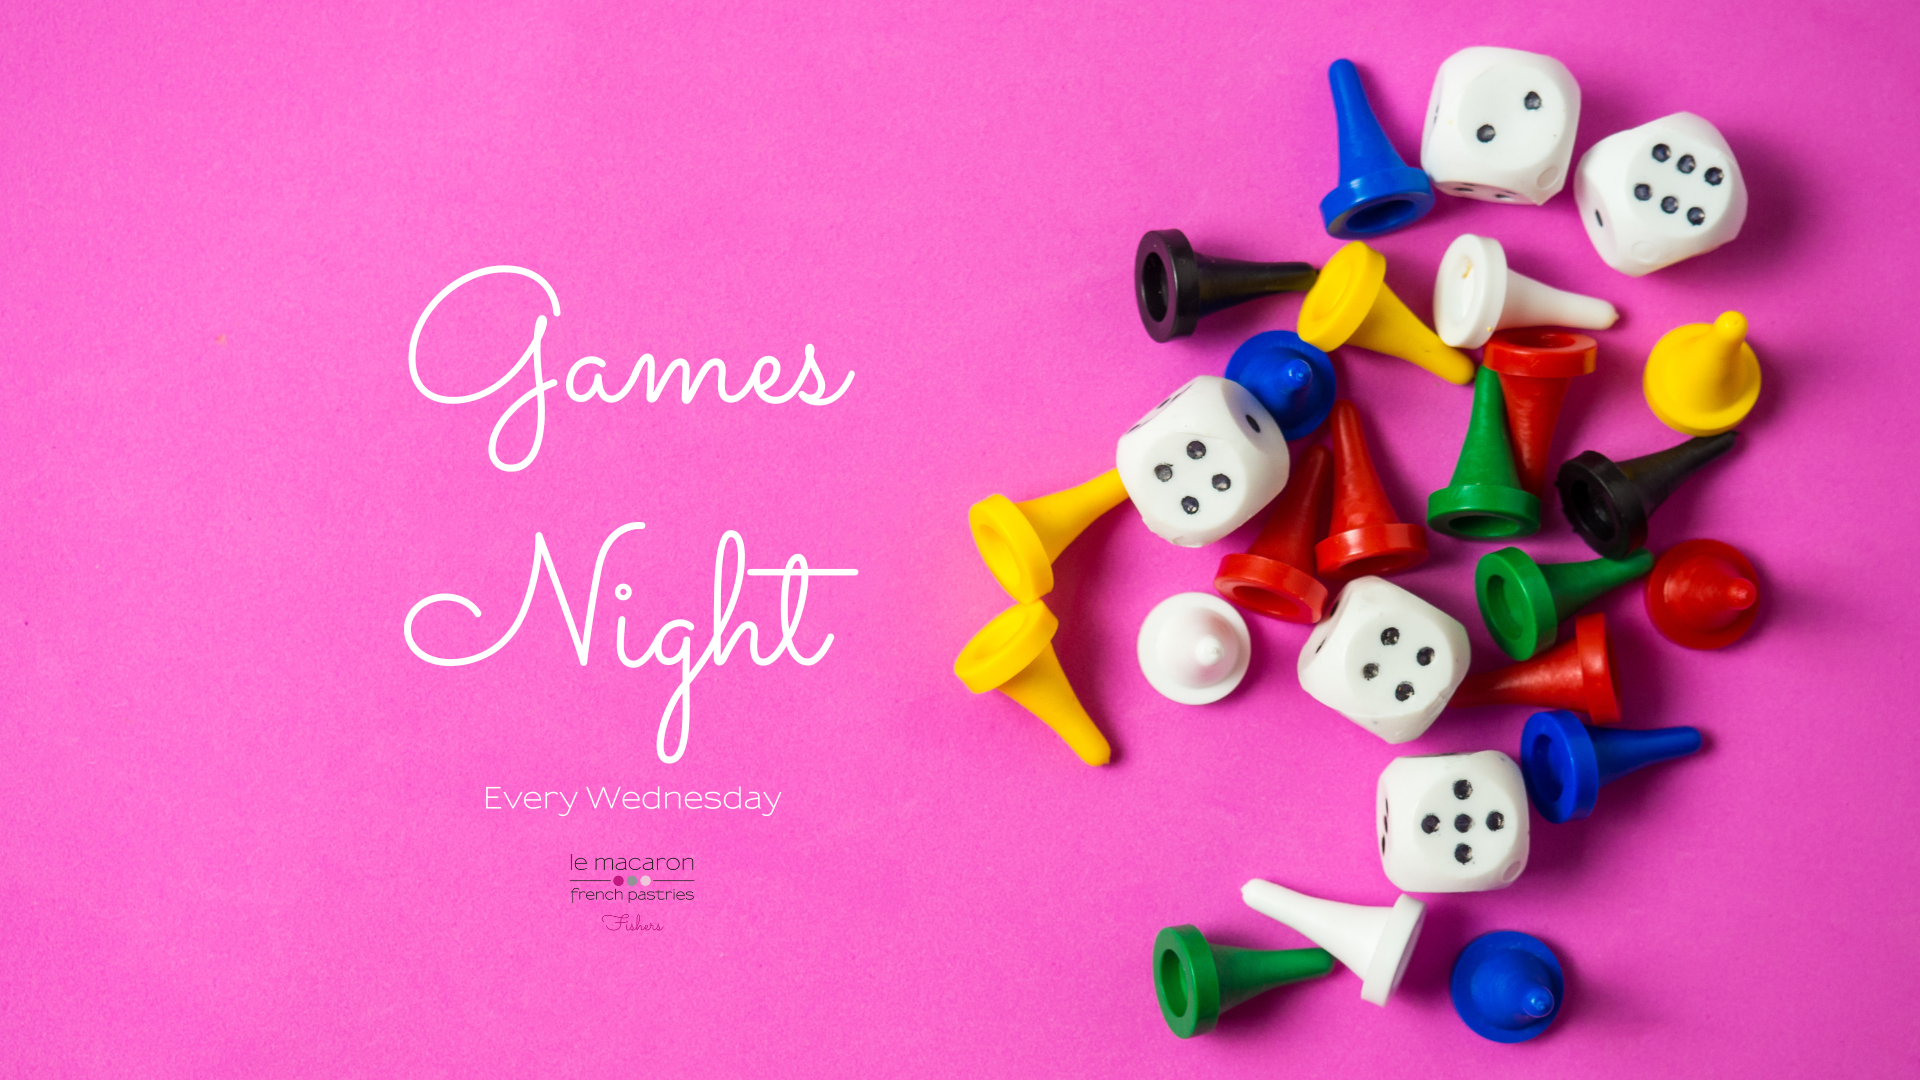 indianapolis game night every wednesday night at le macaron fishers